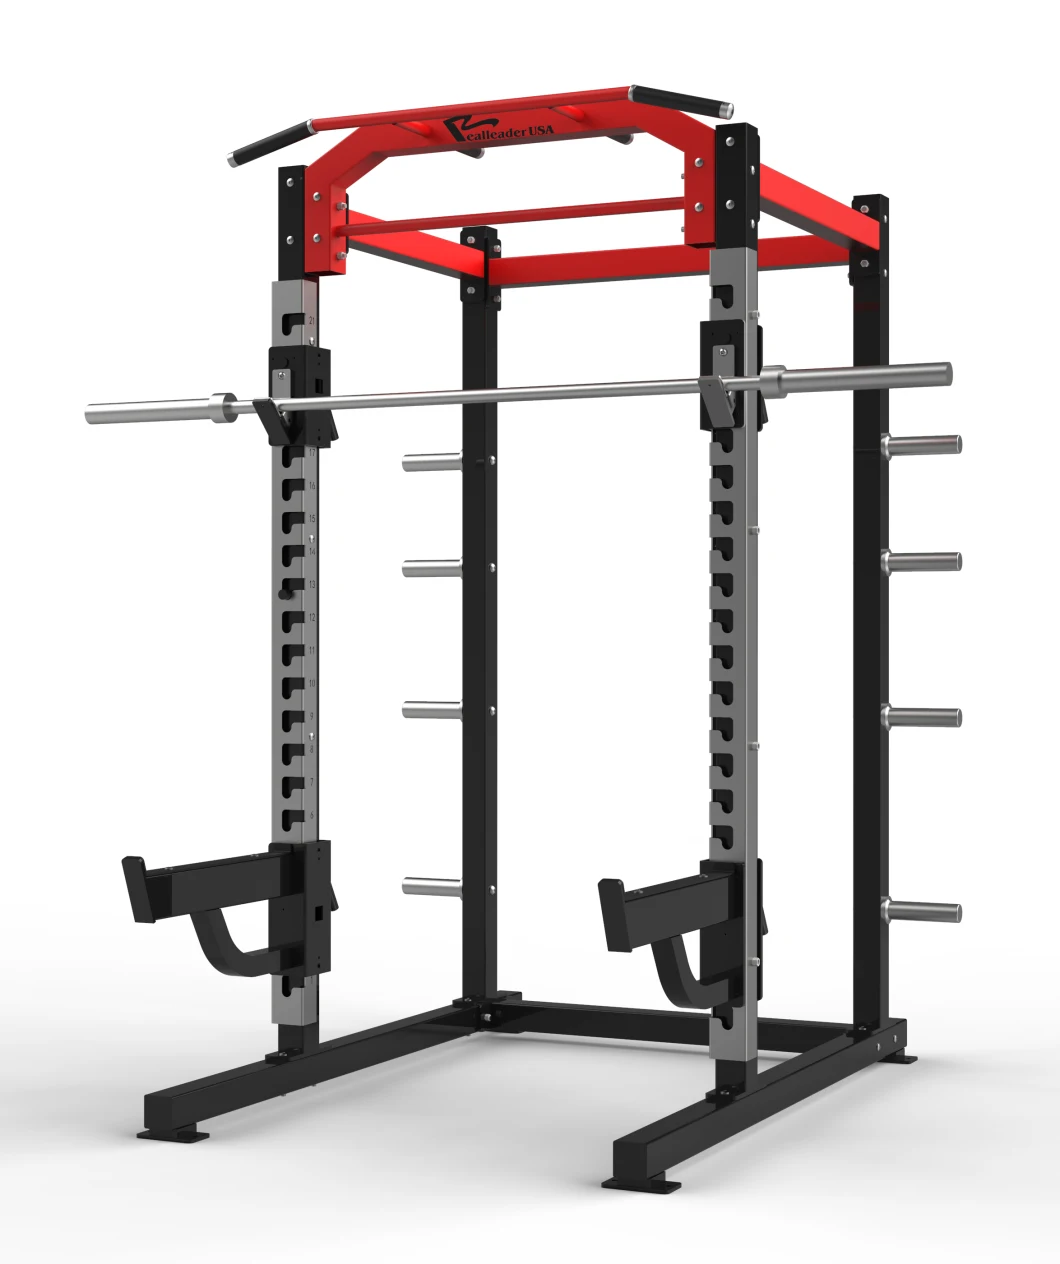 Hot Sale Hammer Plate Loaded Strength Gym Equipment Multi Function Power Cage